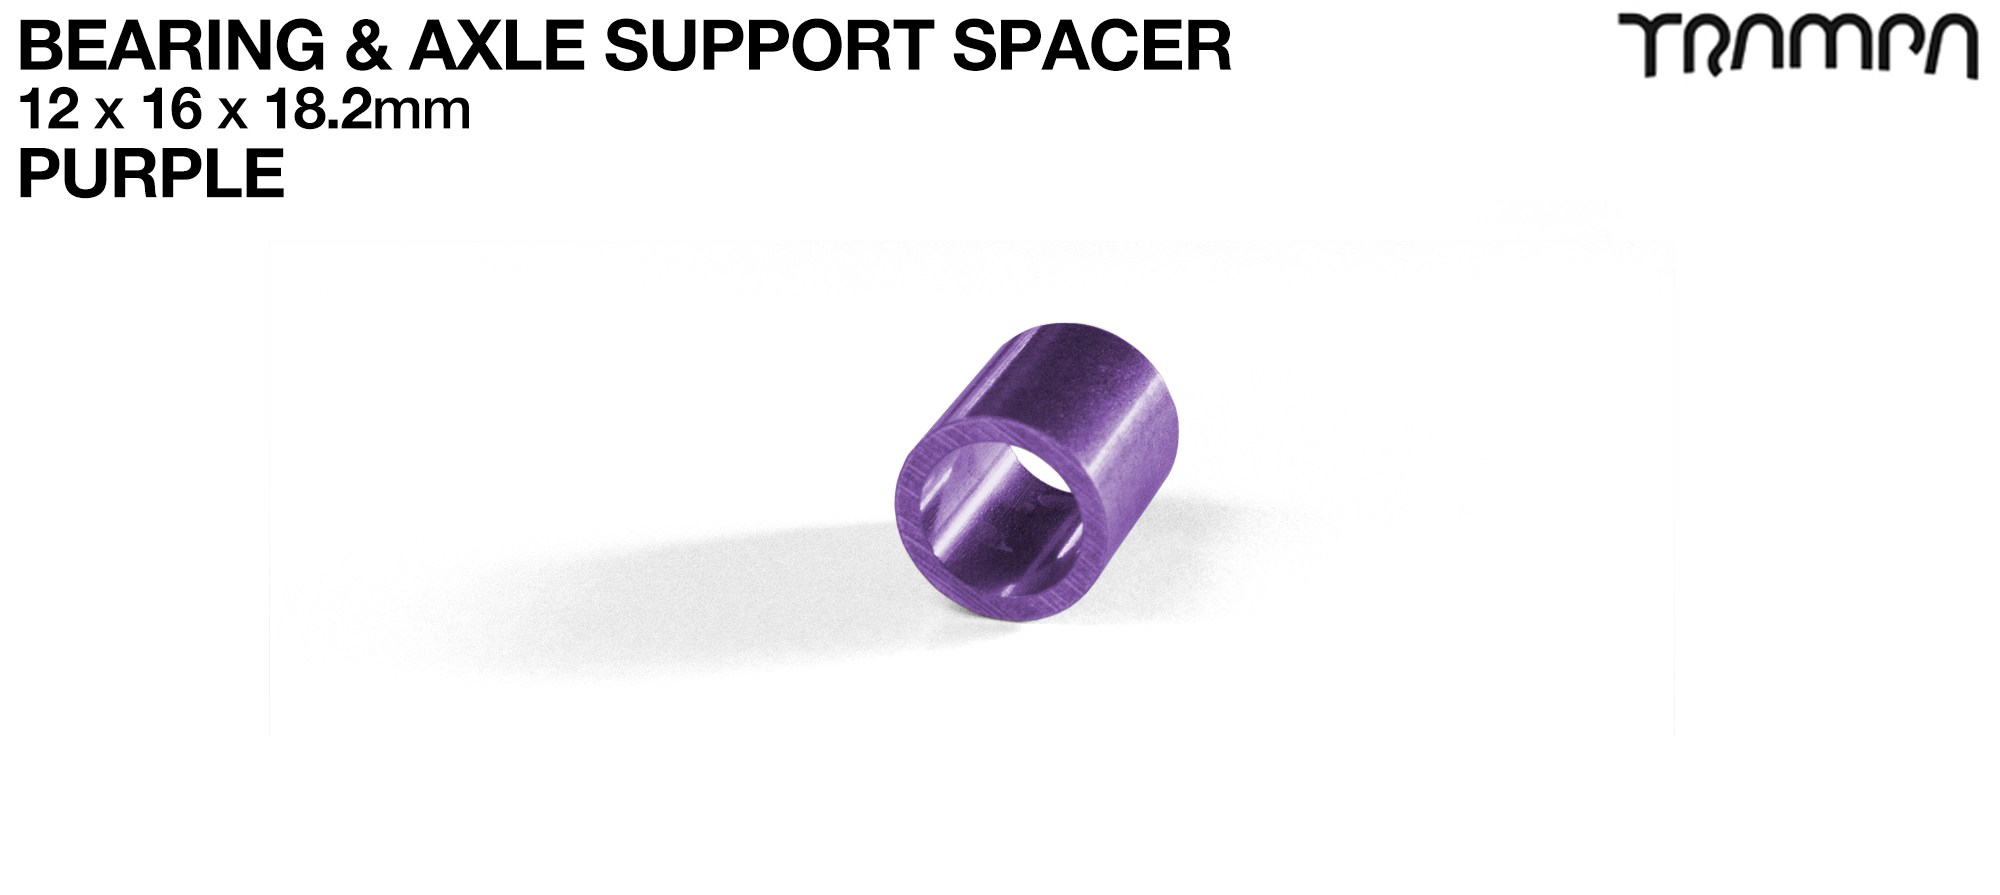 Wheel support spacer for all TRAMPA Wheels on 12mm ATB Axles - CNC precision 12mm x 16mm x 18.2mm  - PURPLE